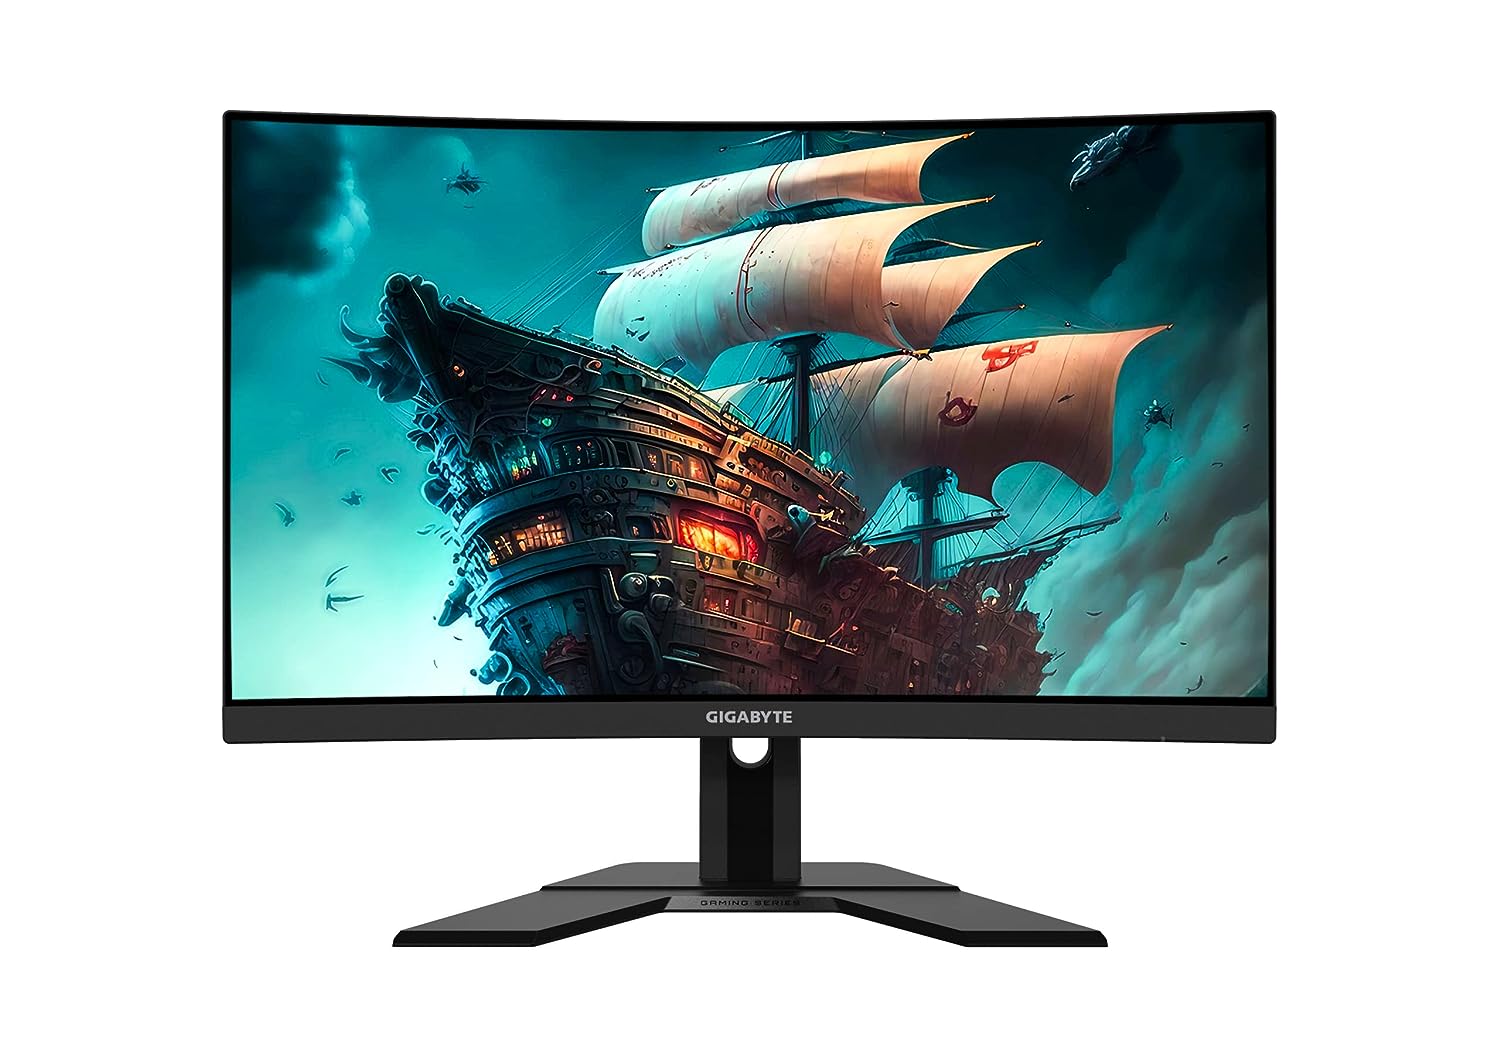 GIGABYTE G27Fc A: 27-Inch, 165Hz, Full HD (1920 x 1080) Curved Gaming LCD Monitor with VA 1500R Display, 1Ms (Mprt) Response Time, 91% Dci-P3, 127% Srgb, Black